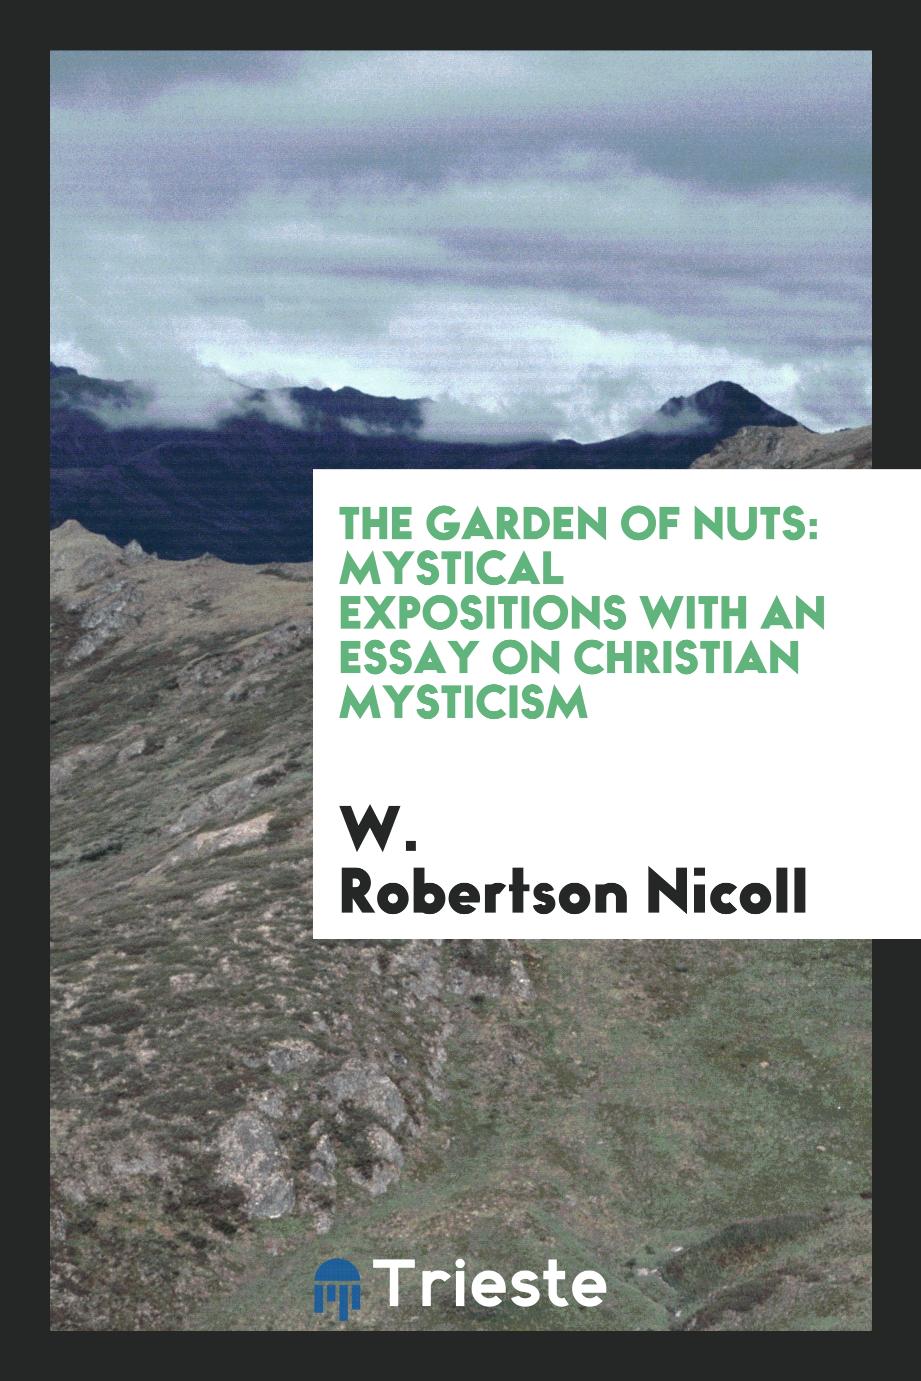 The garden of nuts: mystical expositions with an essay on Christian mysticism